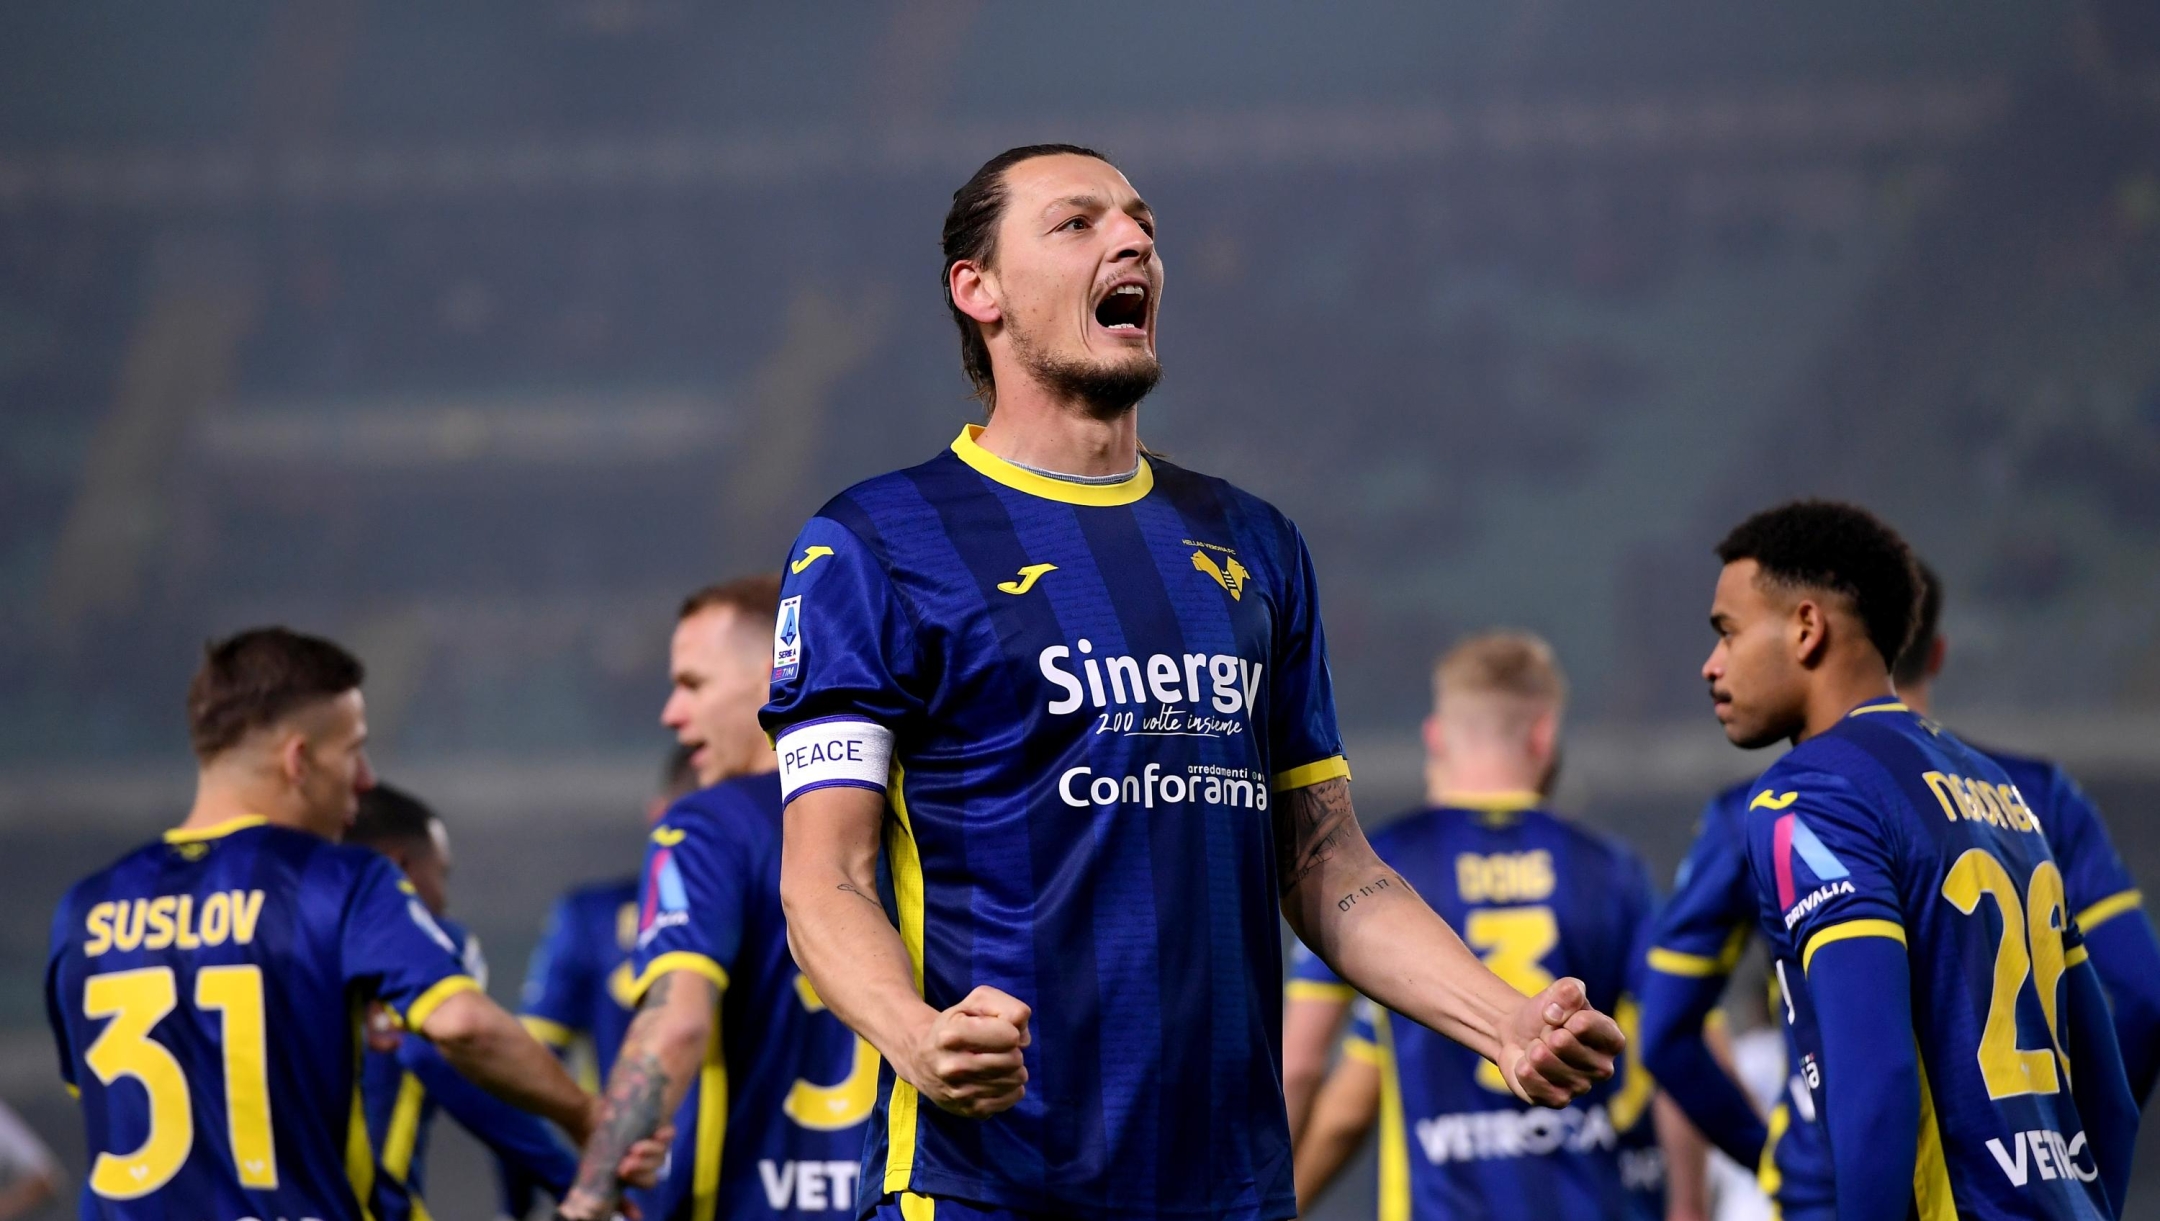 VERONA, ITALY - JANUARY 13: Milan Djuric of Hellas Verona FC celebrates scoring his team's first goal during the Serie A TIM match between Hellas Verona FC and Empoli FC - Serie A TIM  at Stadio Marcantonio Bentegodi on January 13, 2024 in Verona, Italy. (Photo by Alessandro Sabattini/Getty Images)